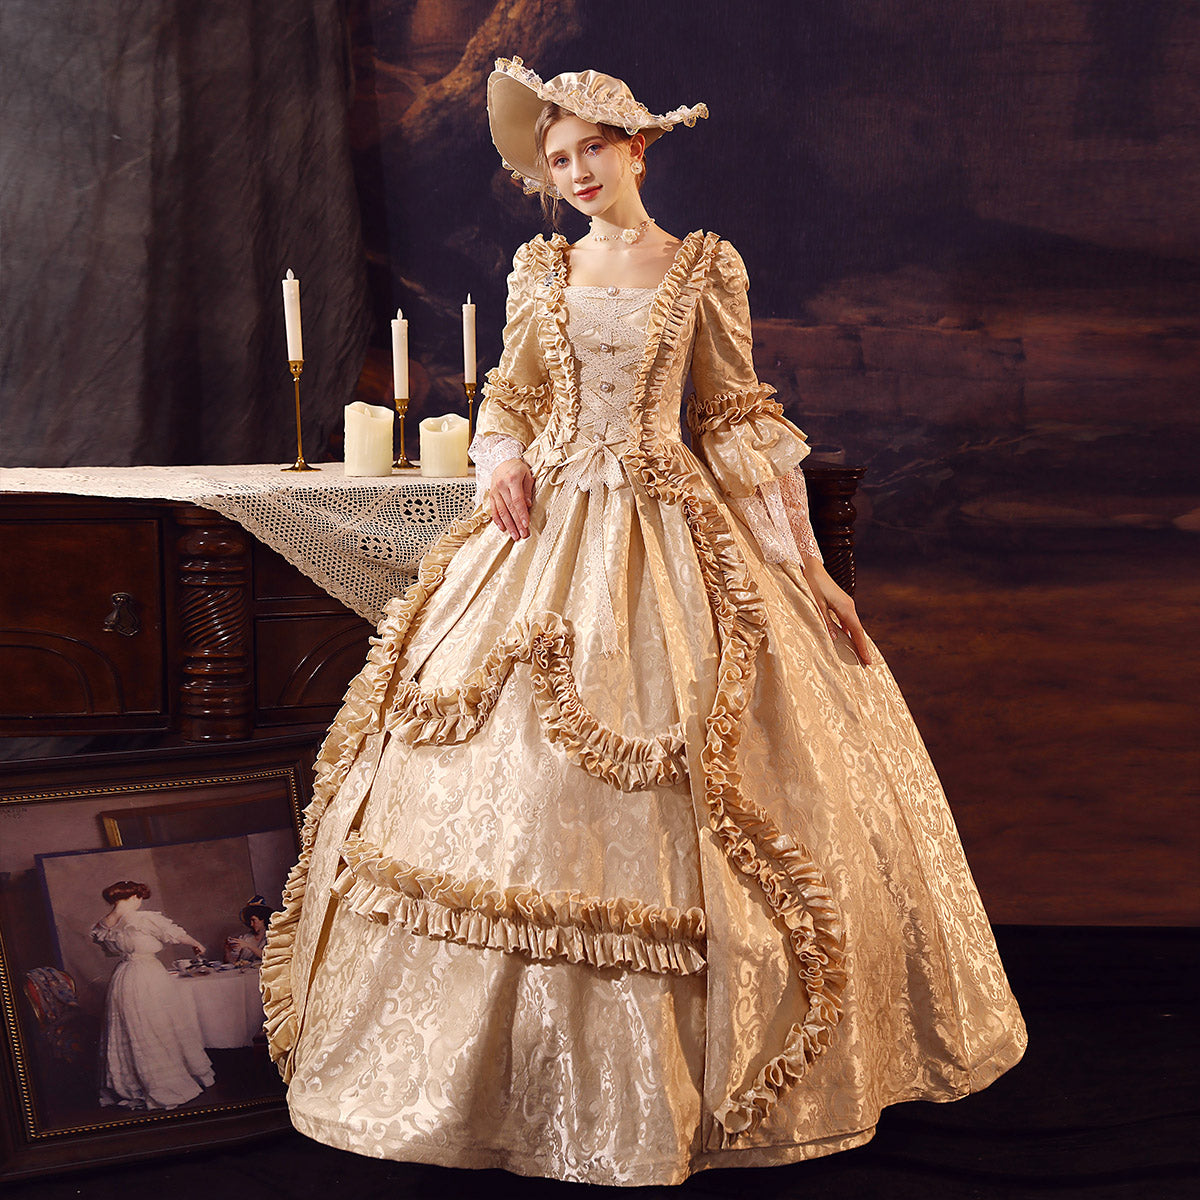 Champagne Retro Costumes Women's Marie Antoinette Costume Euro-Style Vintage Clothing